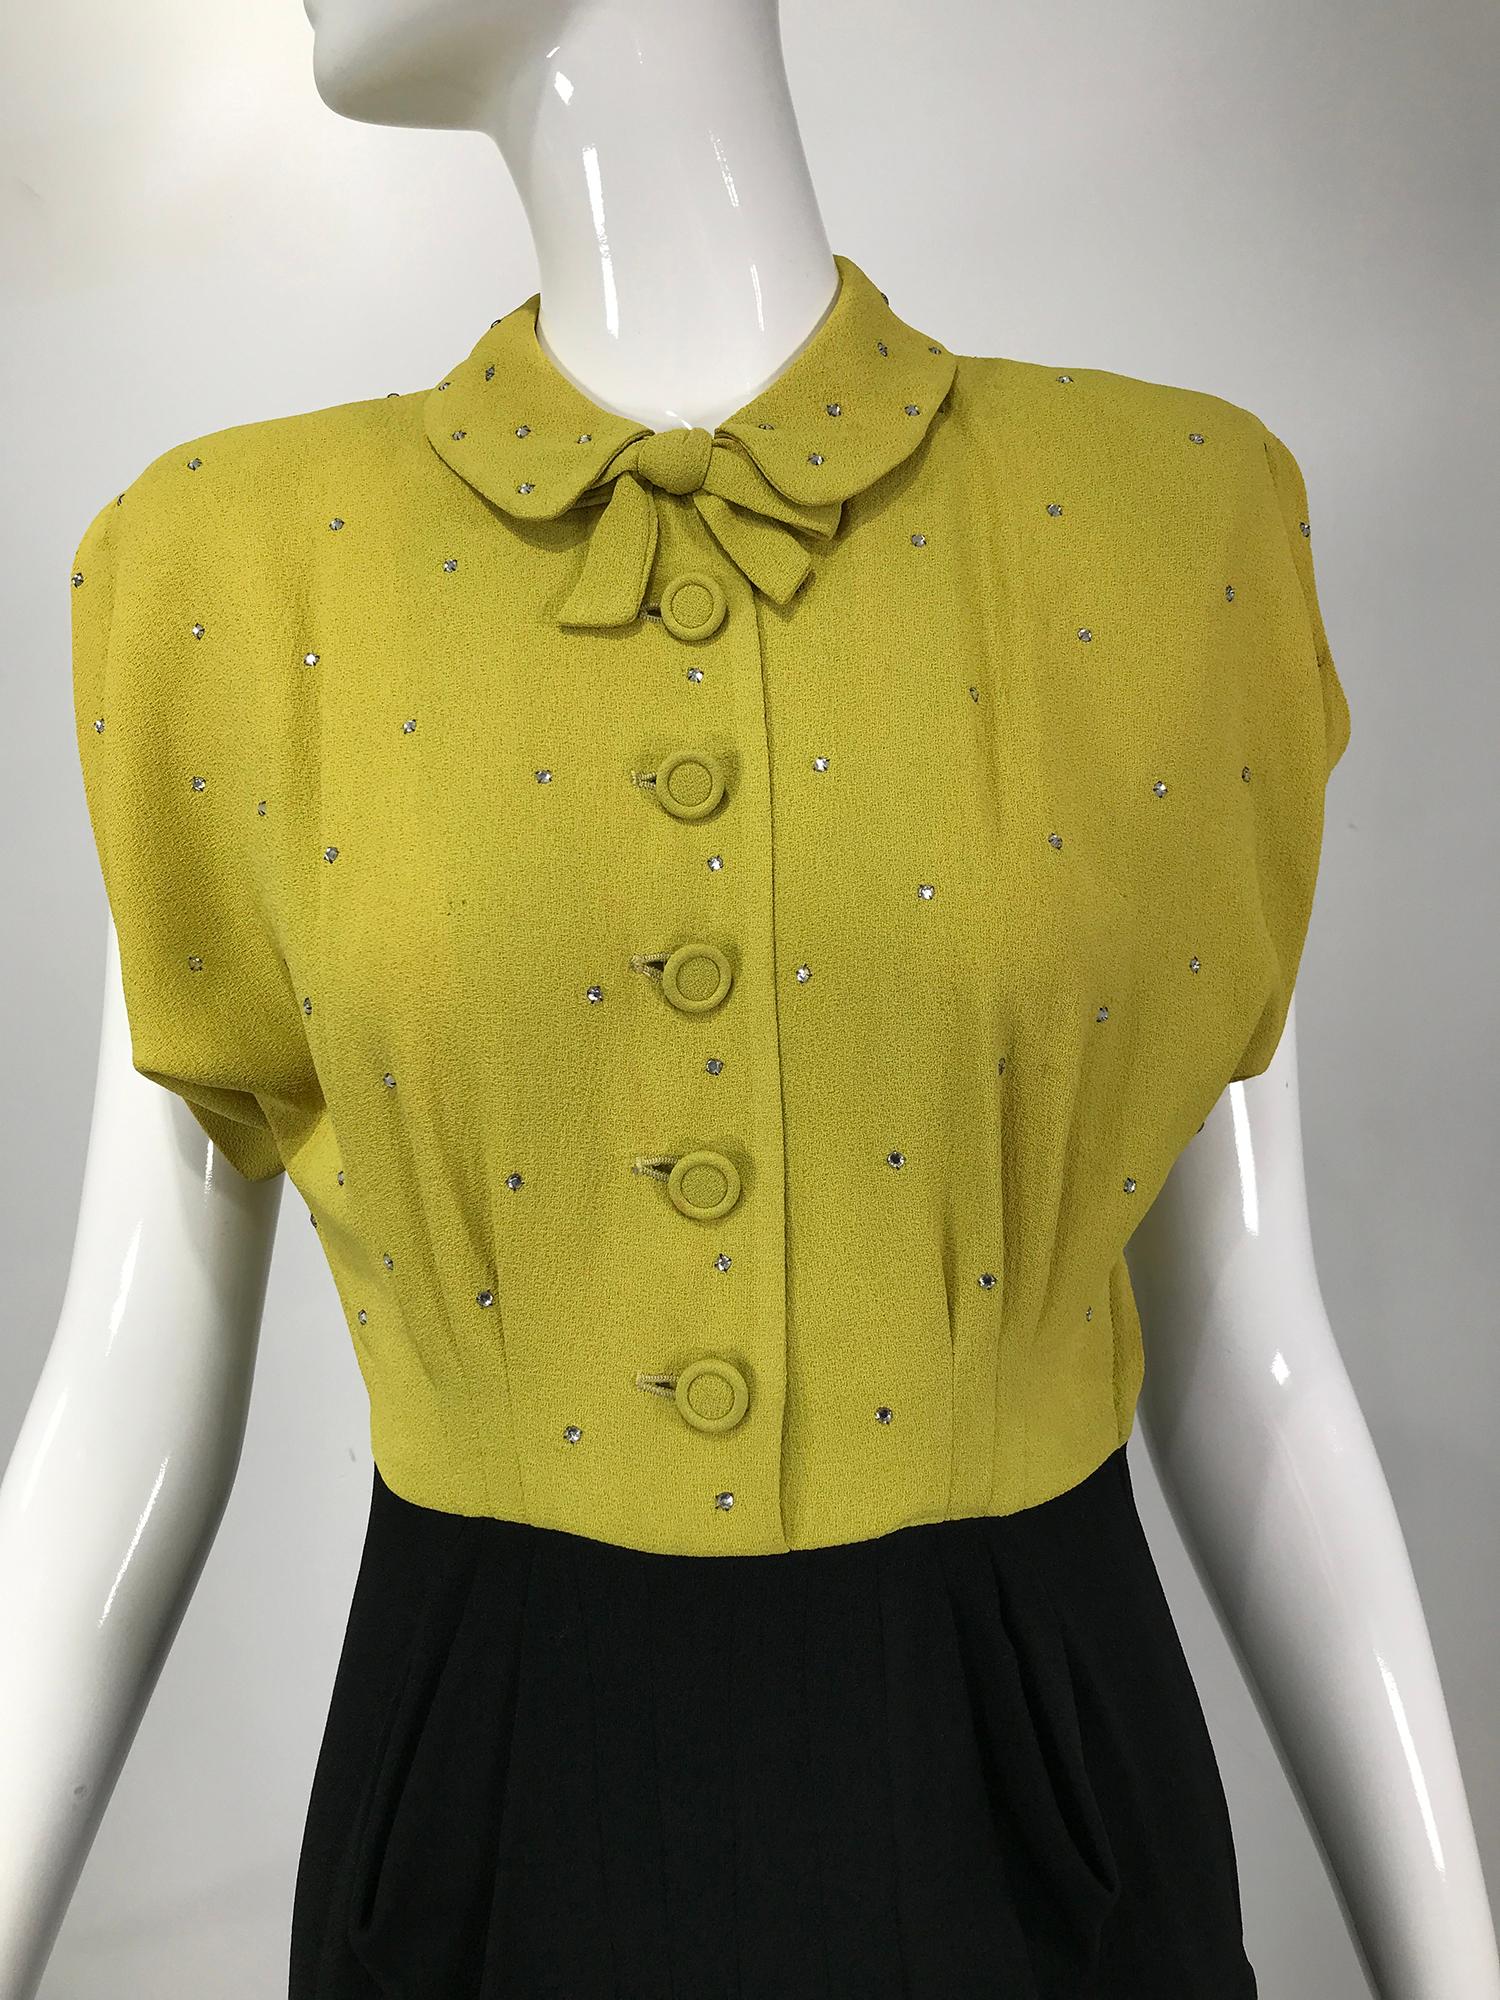 Original Paramount Junior Chicago 1940s chartreuse & black crepe dress with rhinestone bodice. The bodice of this amazing dress is sprinkled with small prong set rhinestones, it has notched cap sleeves, it closes at the front with self buttons and